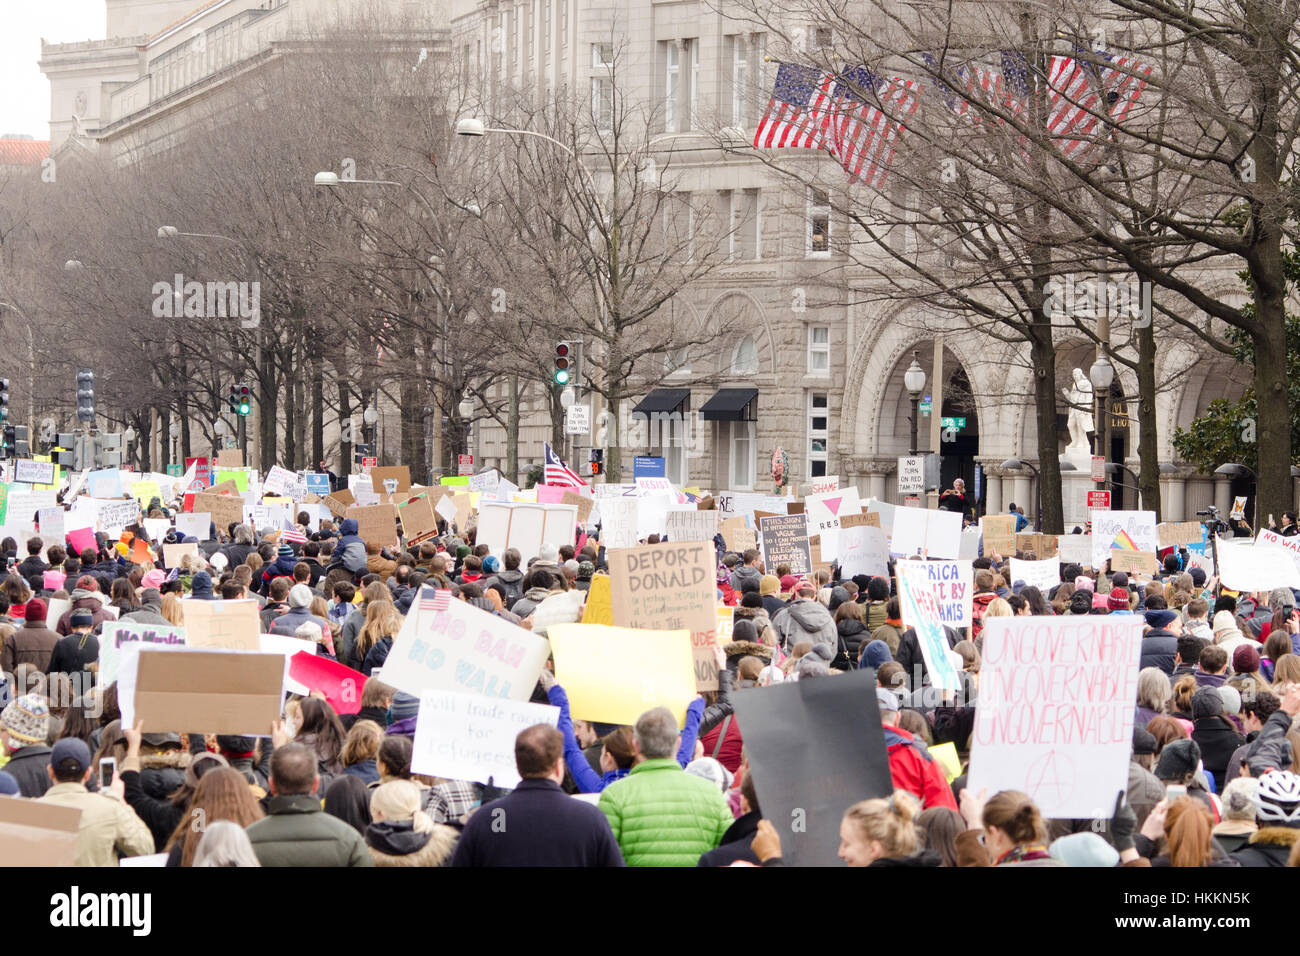 Washington, USA. 29th January, 2017. Protesters march down Pennsylvania Avenue towards the Trump International Hotel, in opposition of President Donald Trump's proposed immigration policies and ban on Muslim entry, in Washington, D.C. Credit: Angela Drake/Alamy Live News Stock Photo